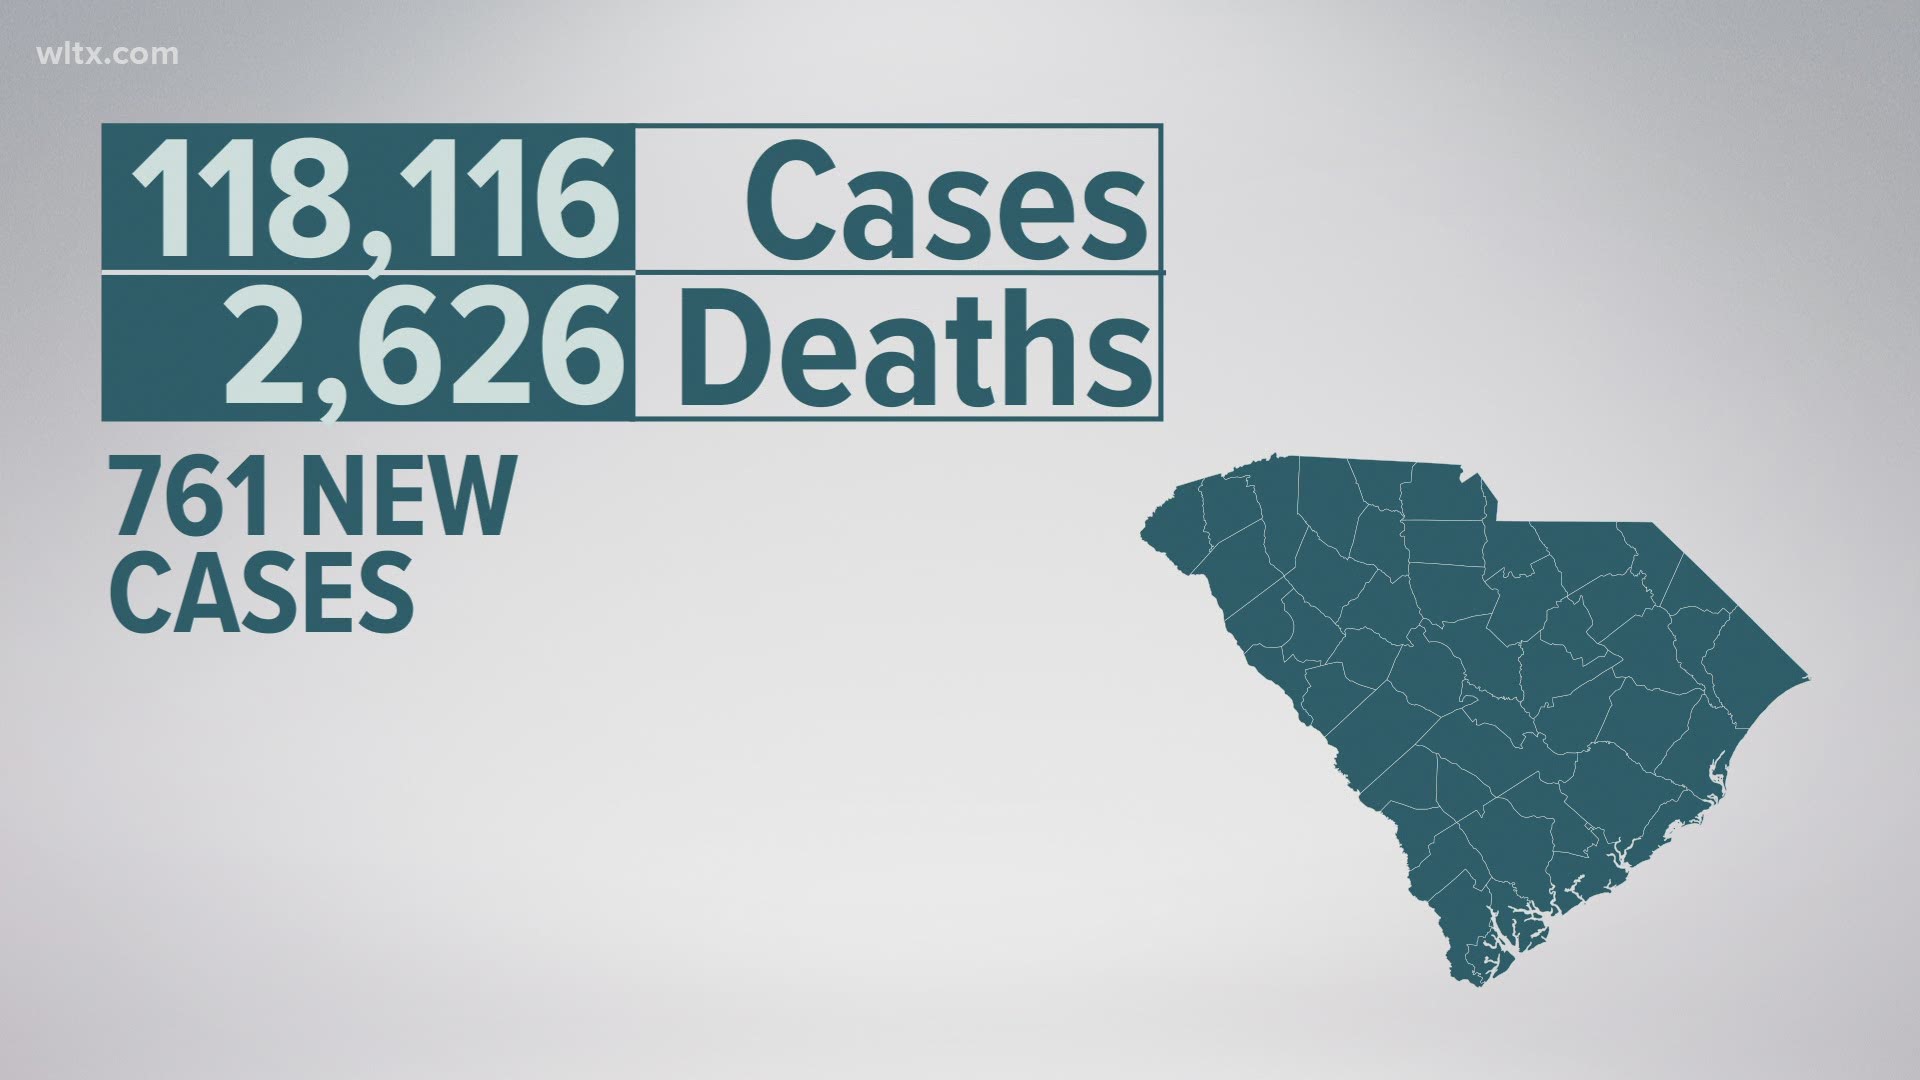 This brings the total number of confirmed cases to 118,116, probable cases to 1,730, confirmed deaths to 2,626, and 131 probable deaths.